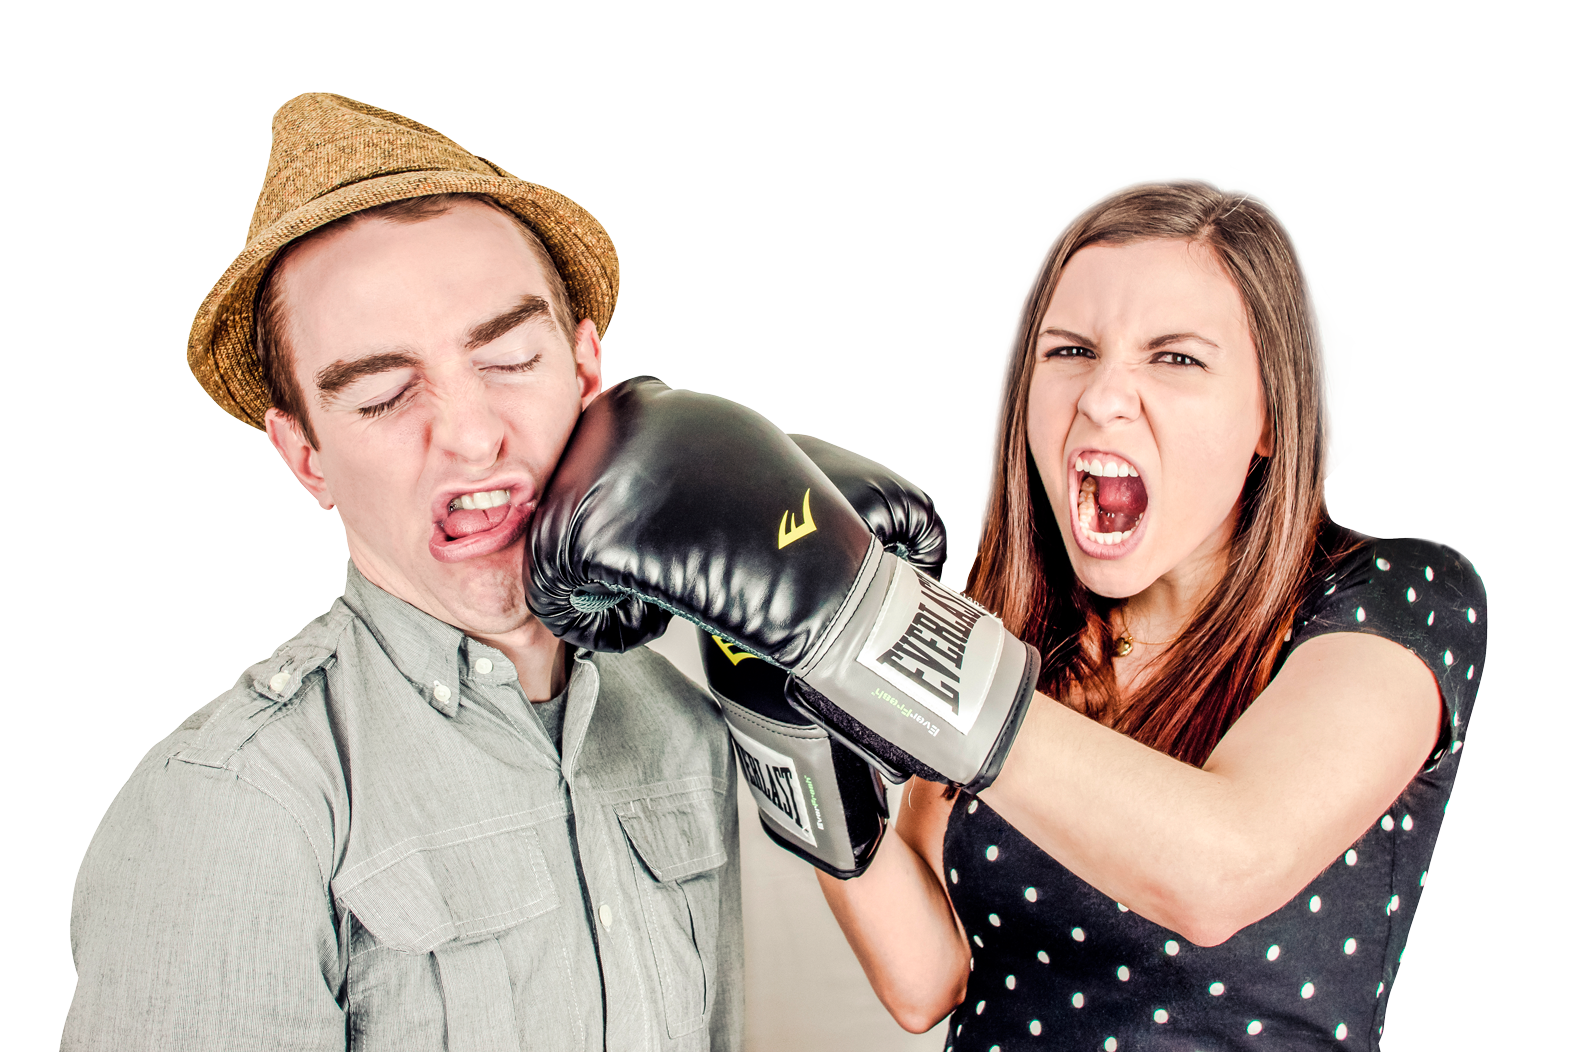 Angry Person PNG HD Image